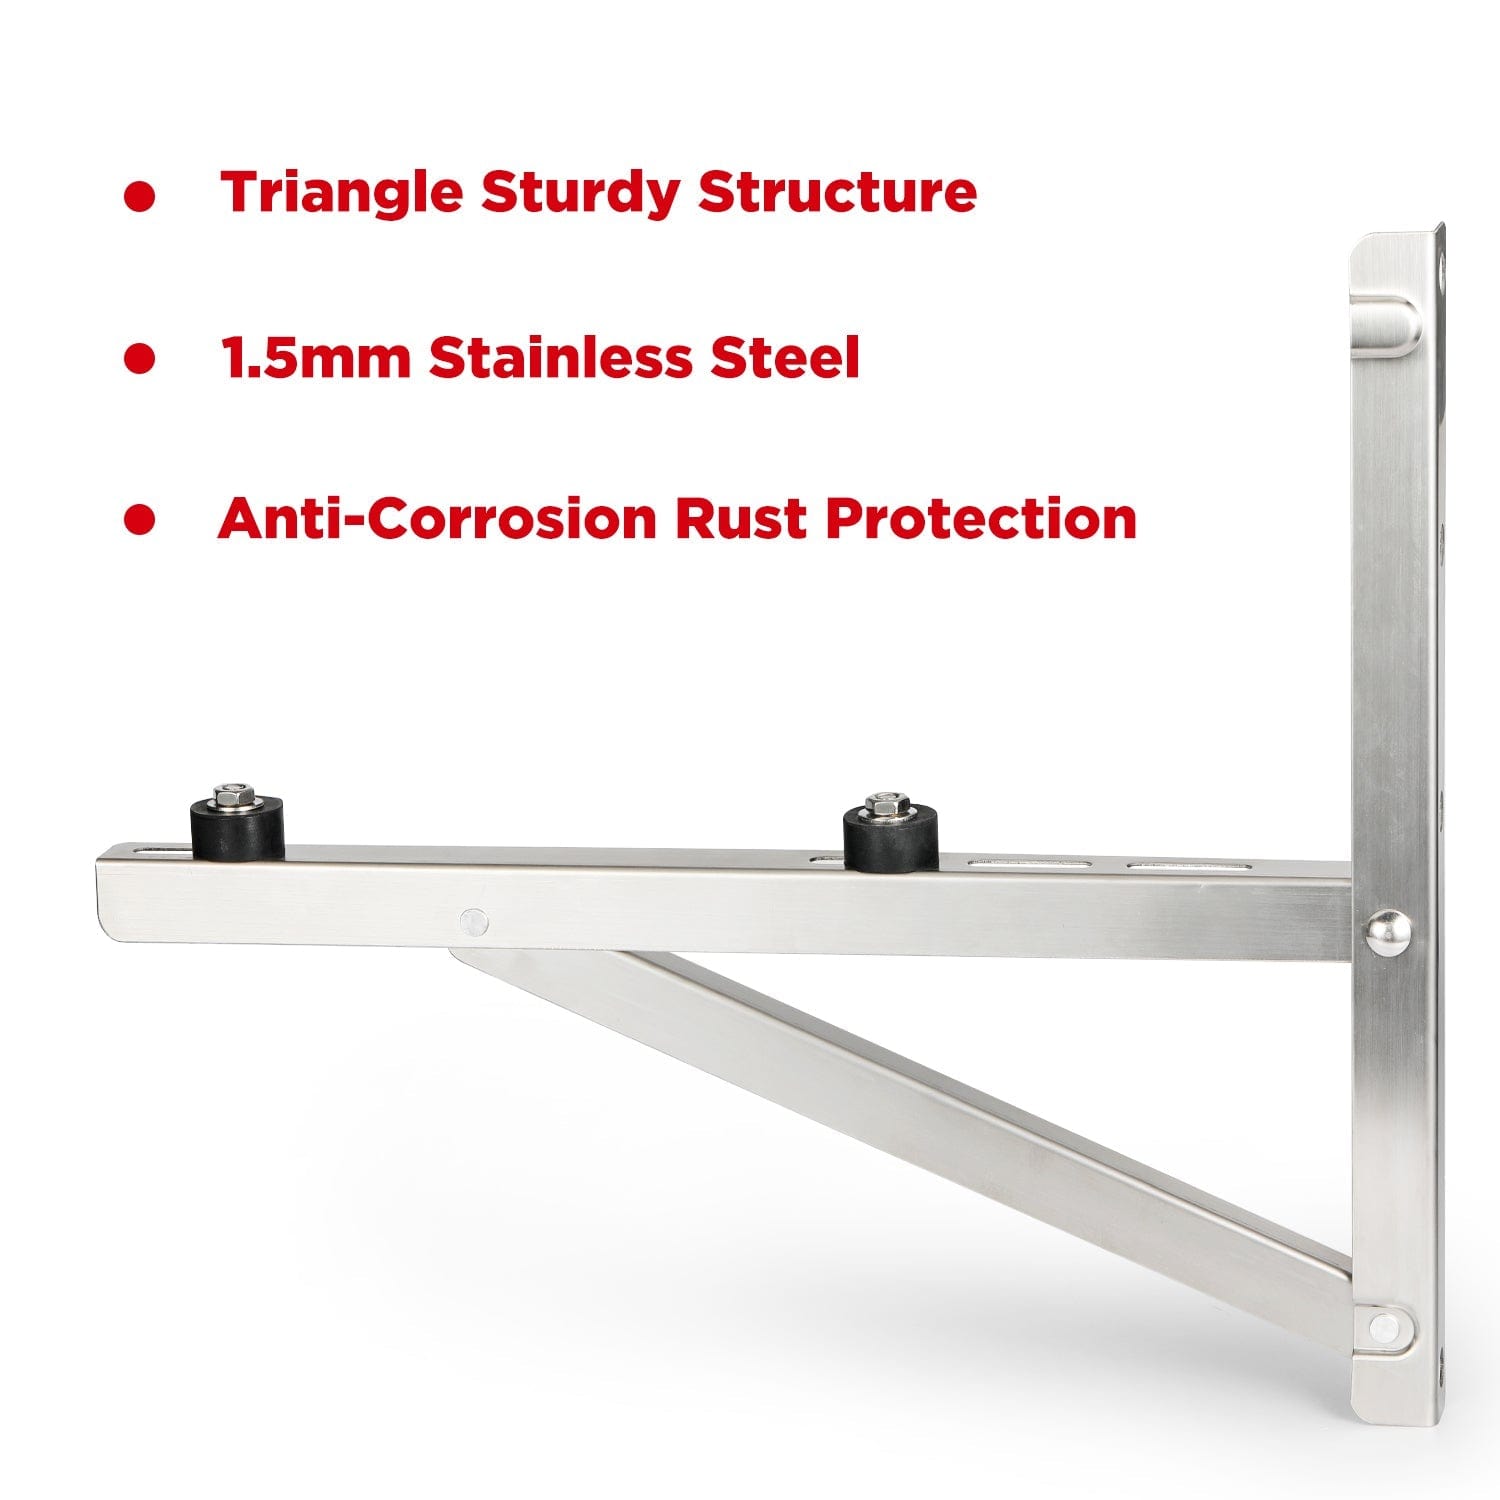 TURBRO Wall Mounted Stainless Steel Bracket for Mini Spilt AC Accessories